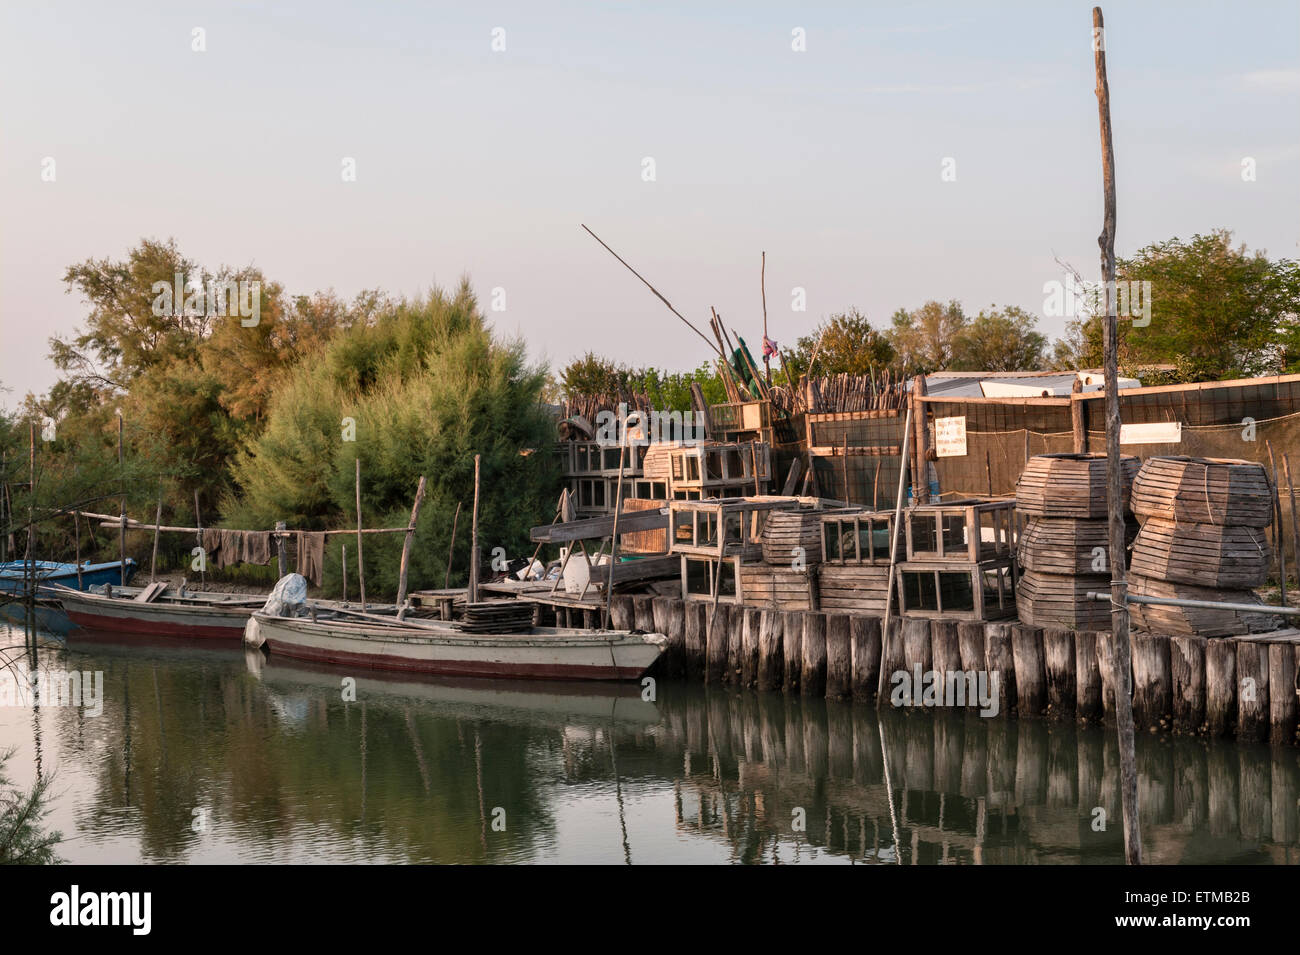 Venice, Italy. Fishermen's shacks, boats and crab or eel traps on one of the many tiny islands in the Venetian lagoon Stock Photo